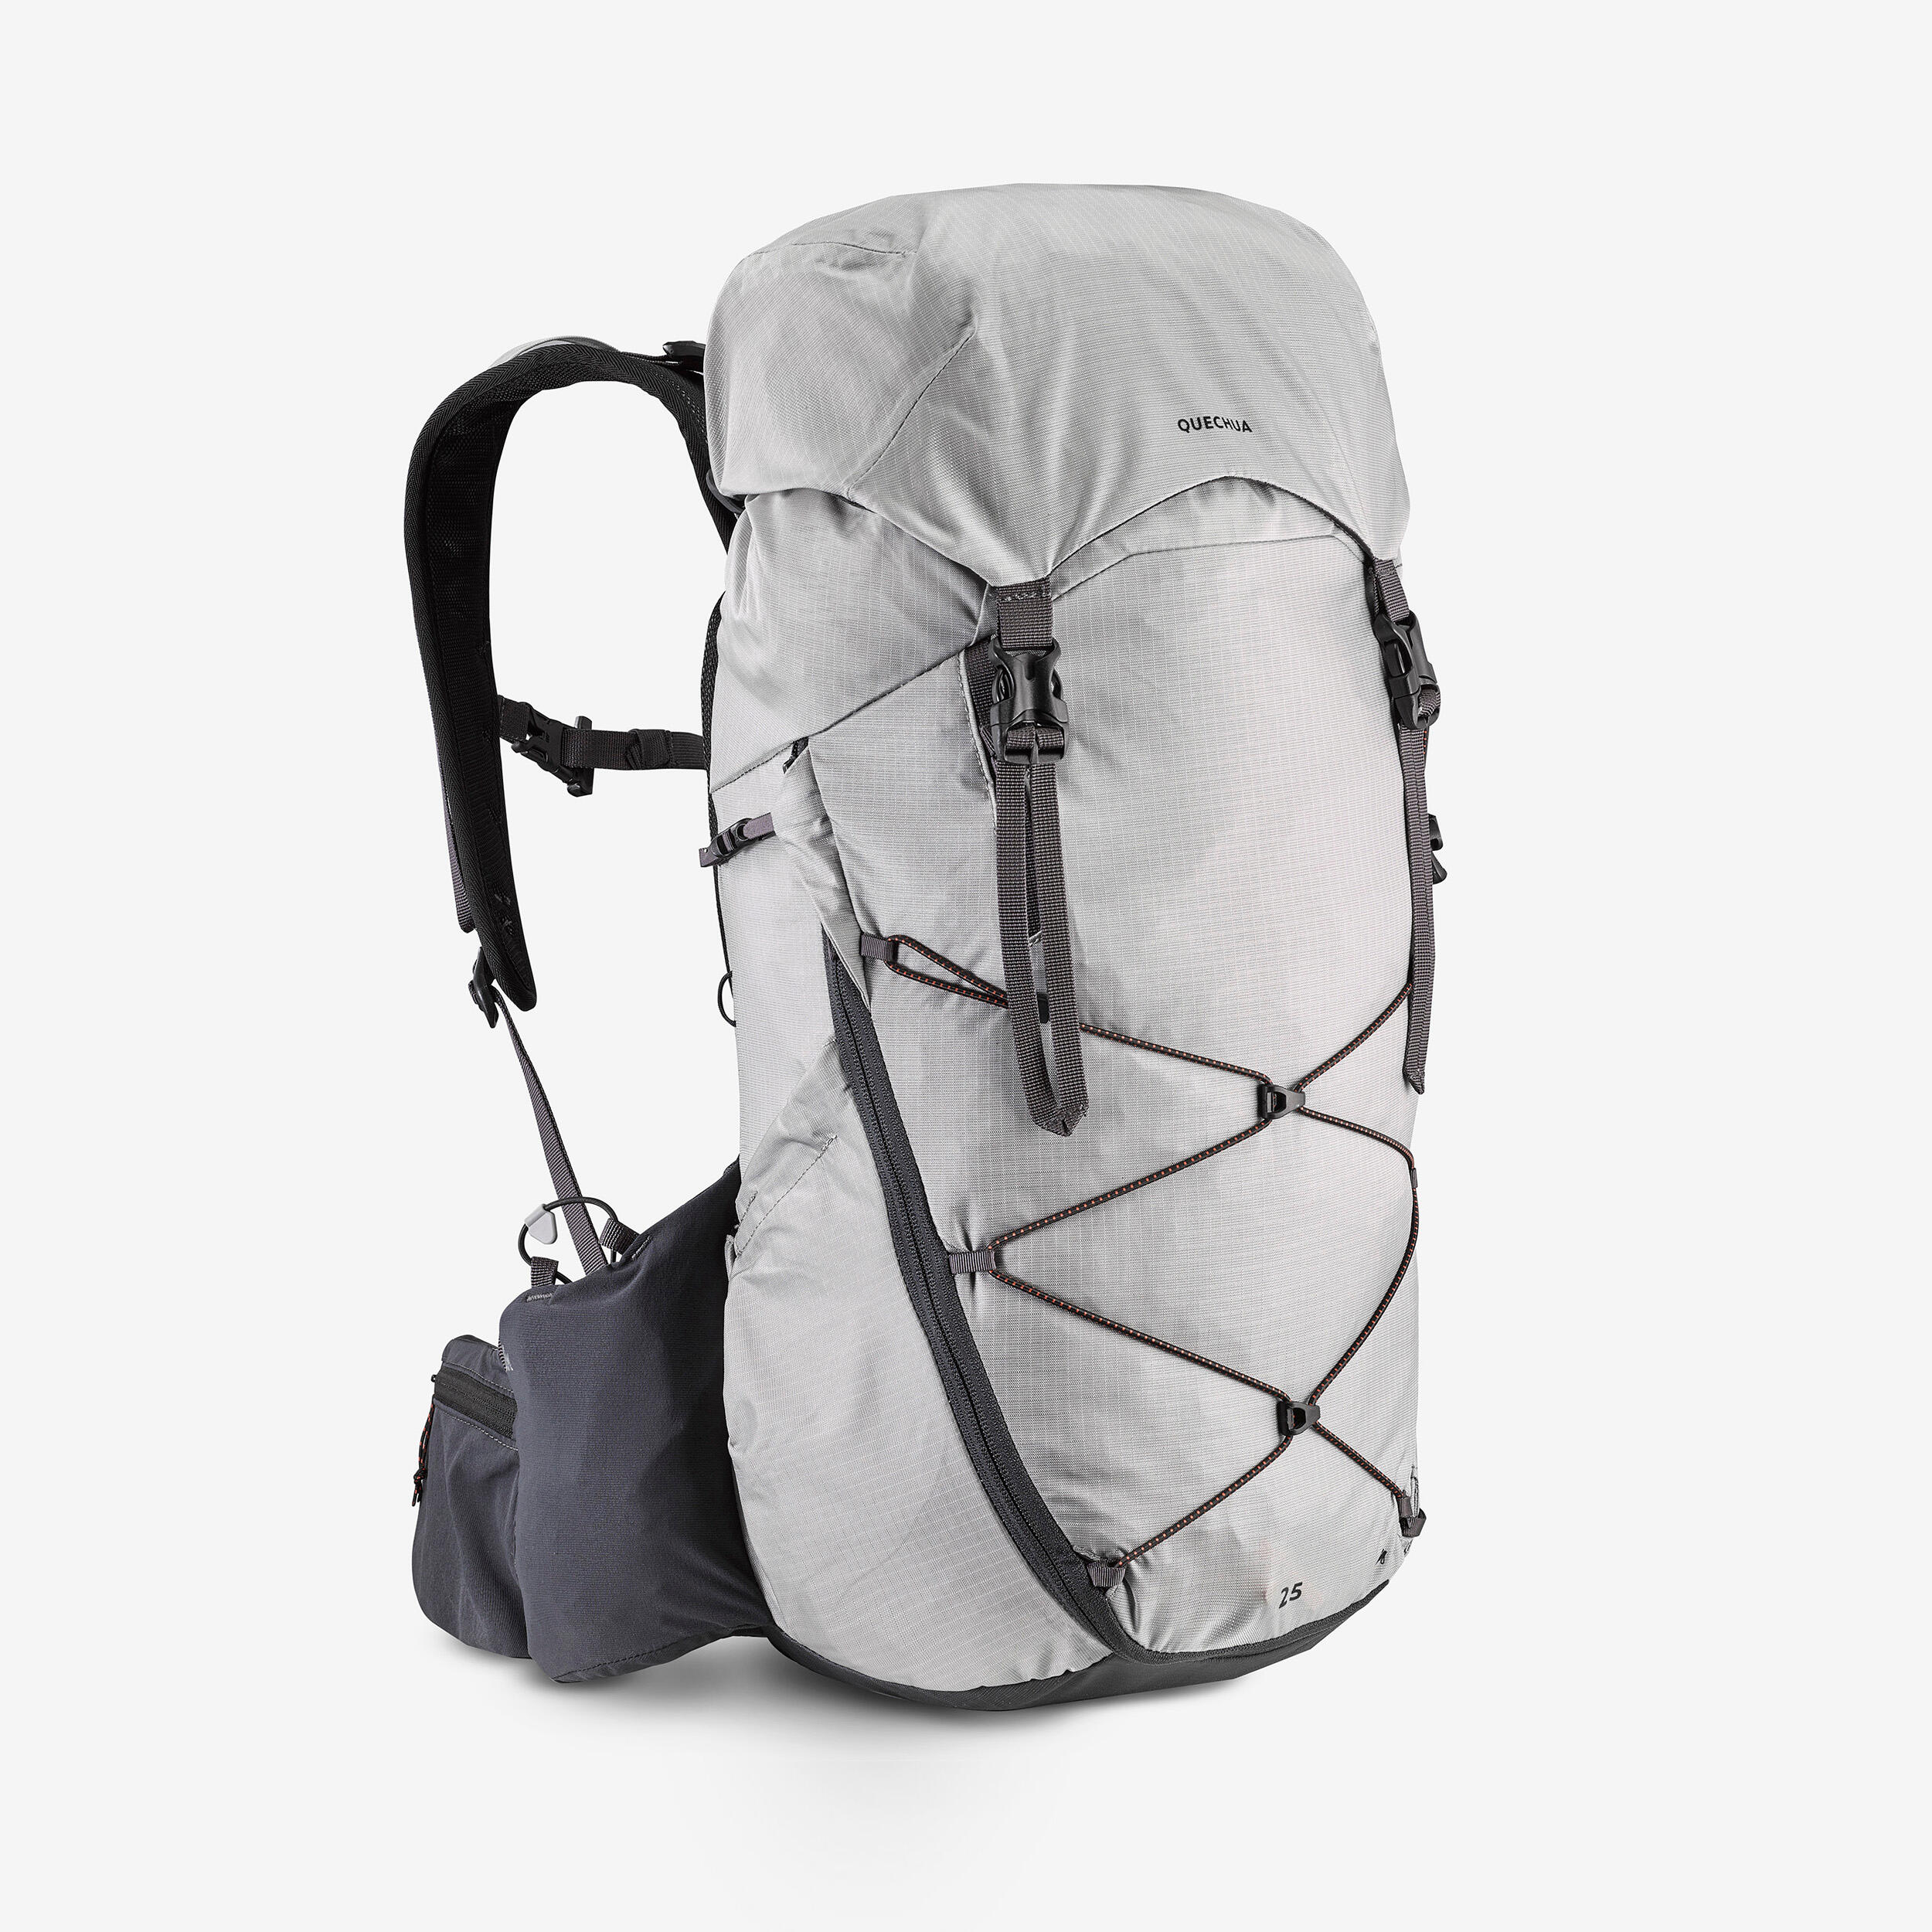 QUECHUA Mountain hiking backpack 25L - MH900